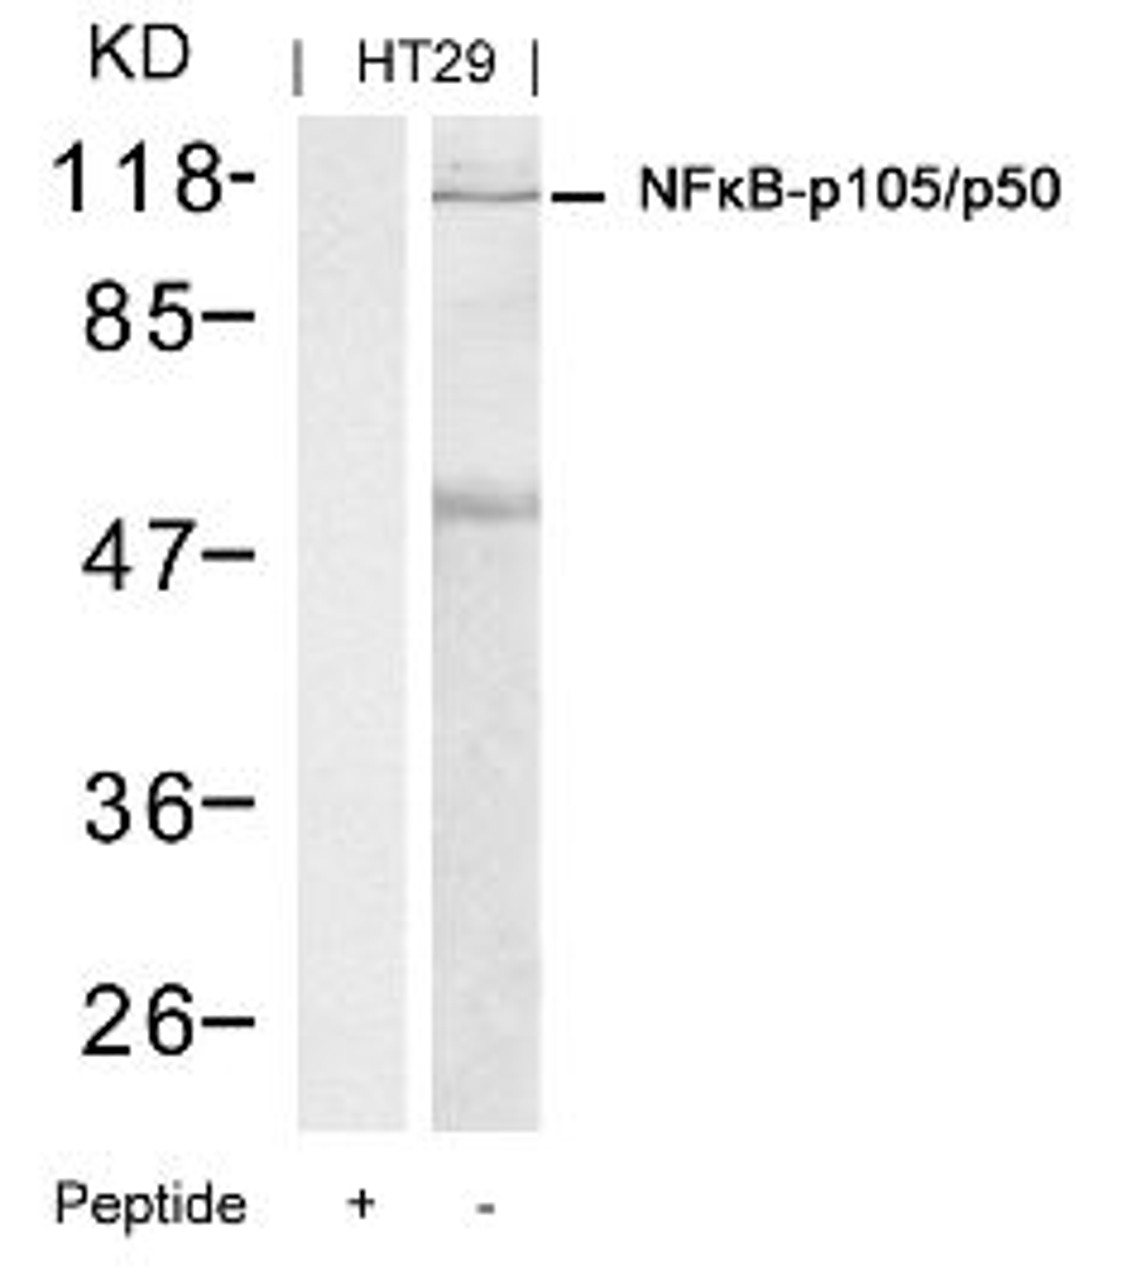 Western blot analysis of lysed extracts from HT29 cells using NF&#954;B-p105/p50 (Ab-337) .